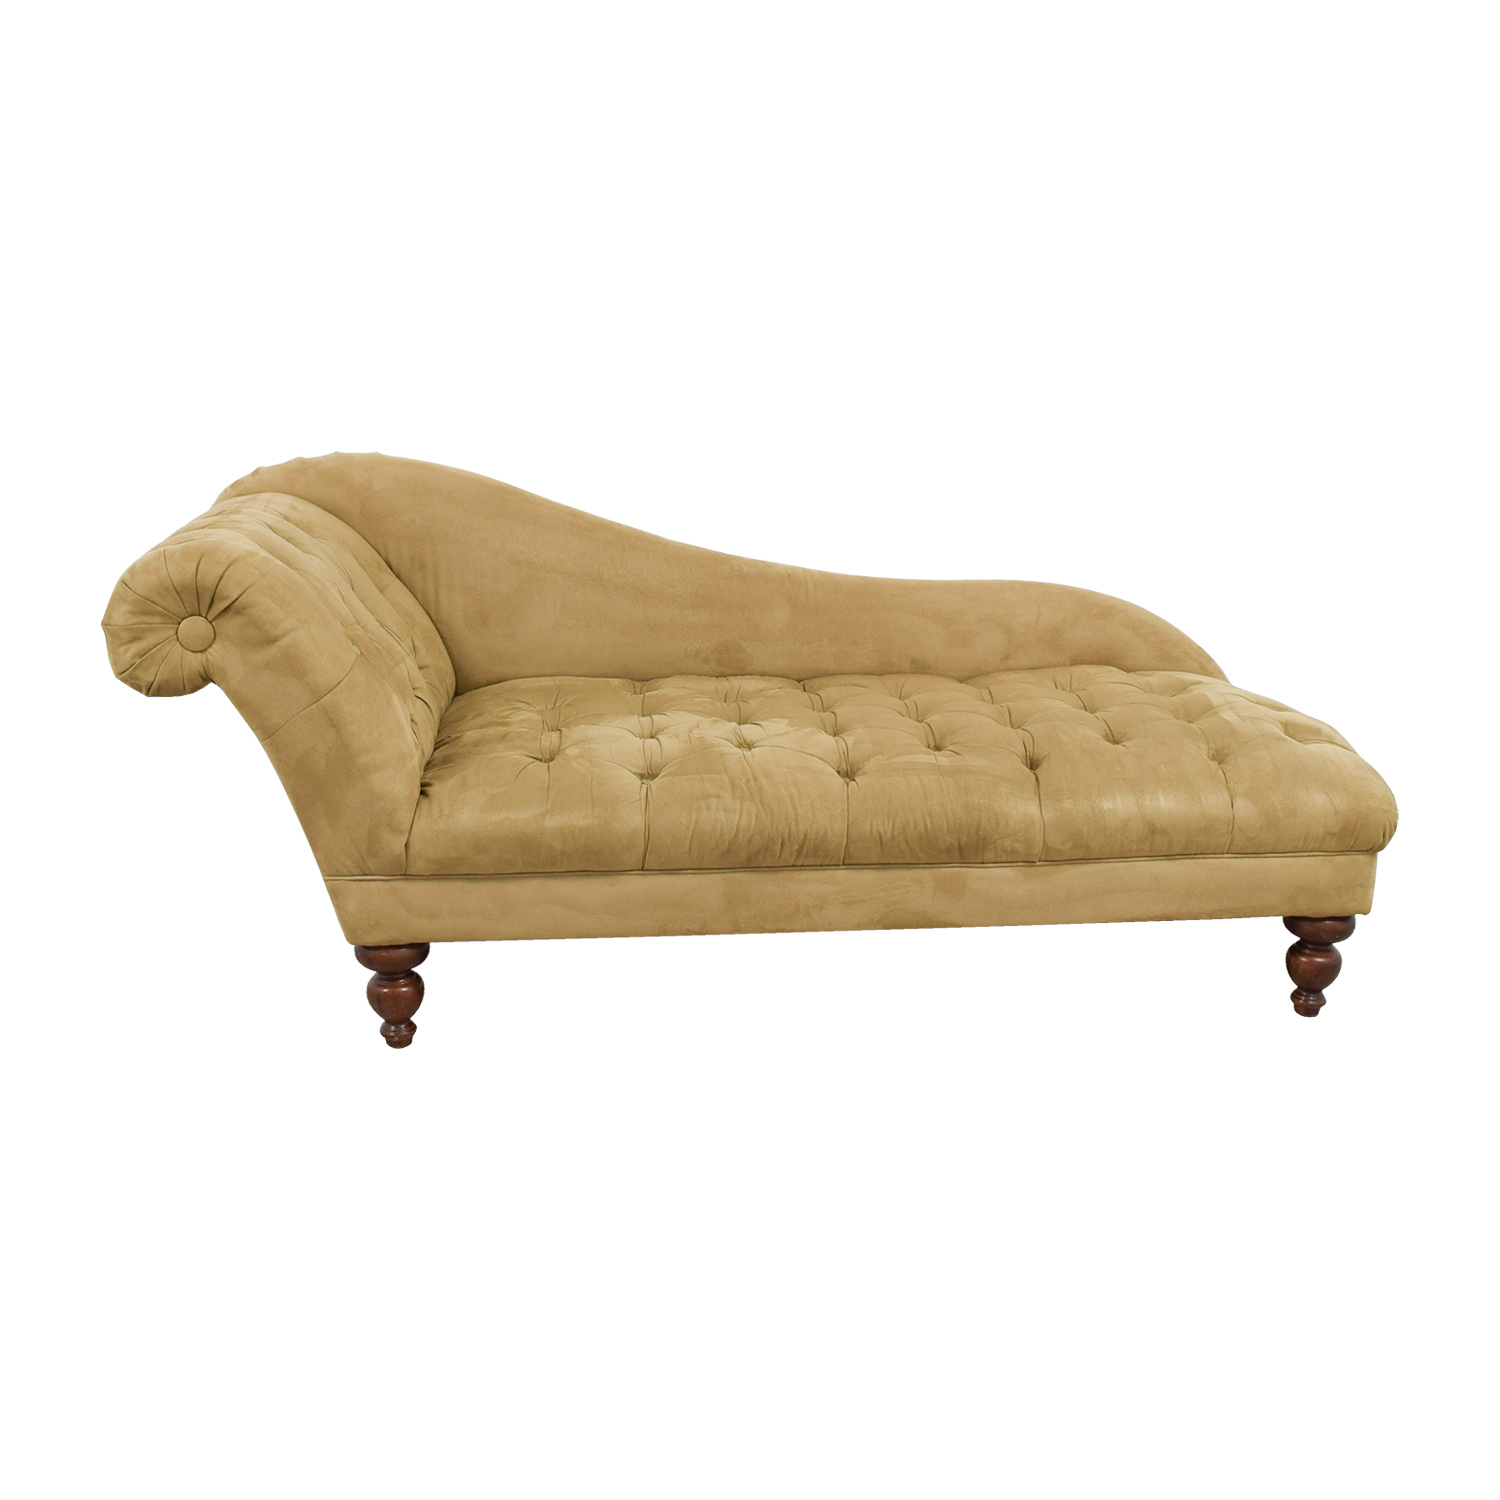 tufted brown chaise lounge sofa nyc ... XOHDTLB